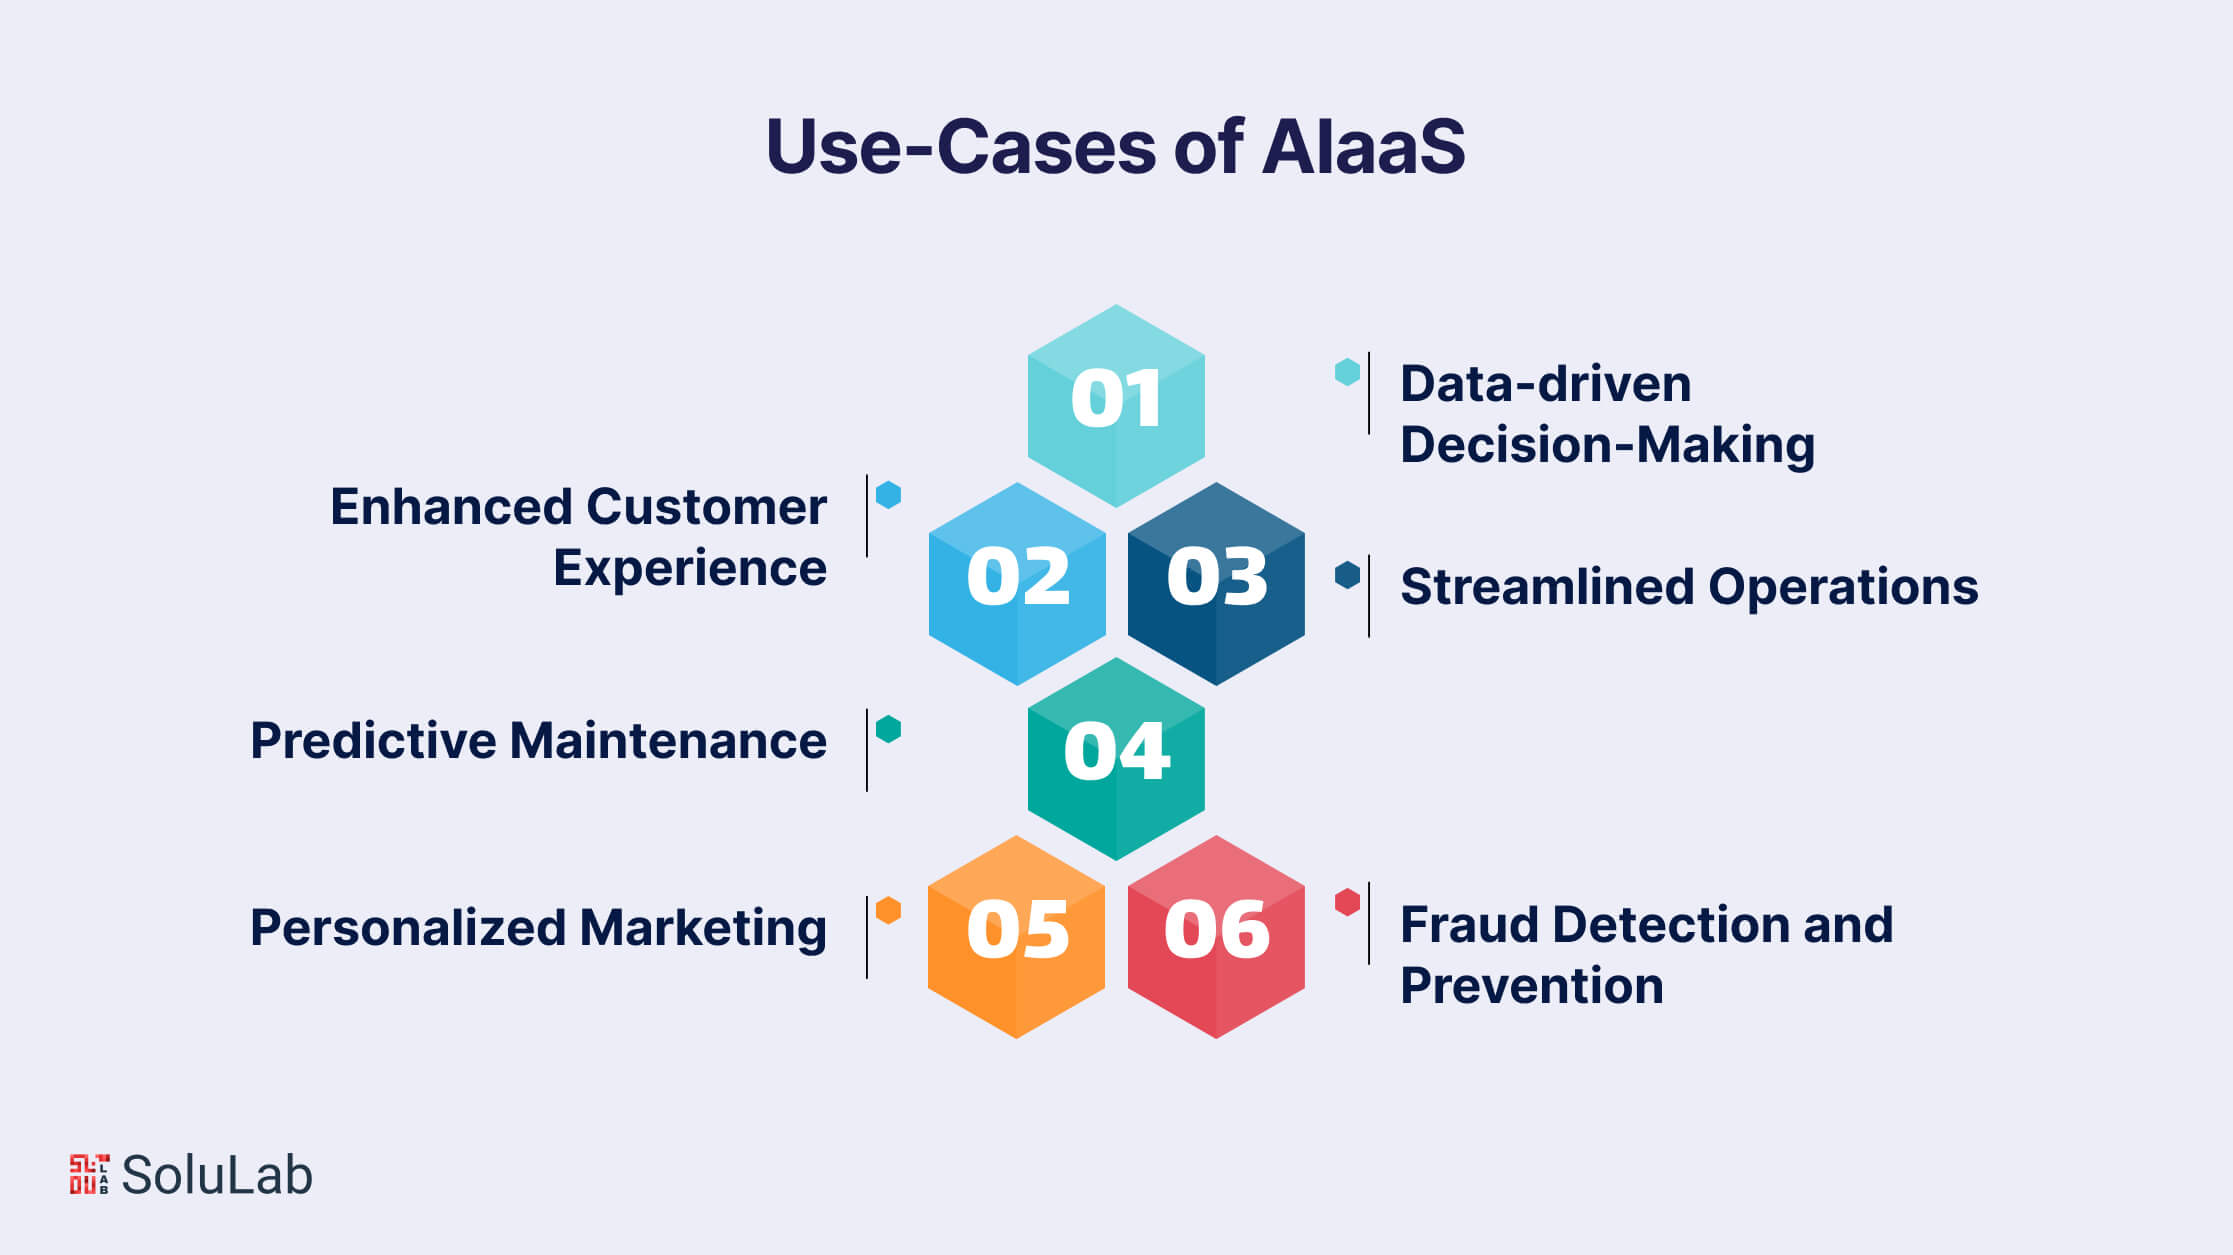 Use-Cases of AIaaS